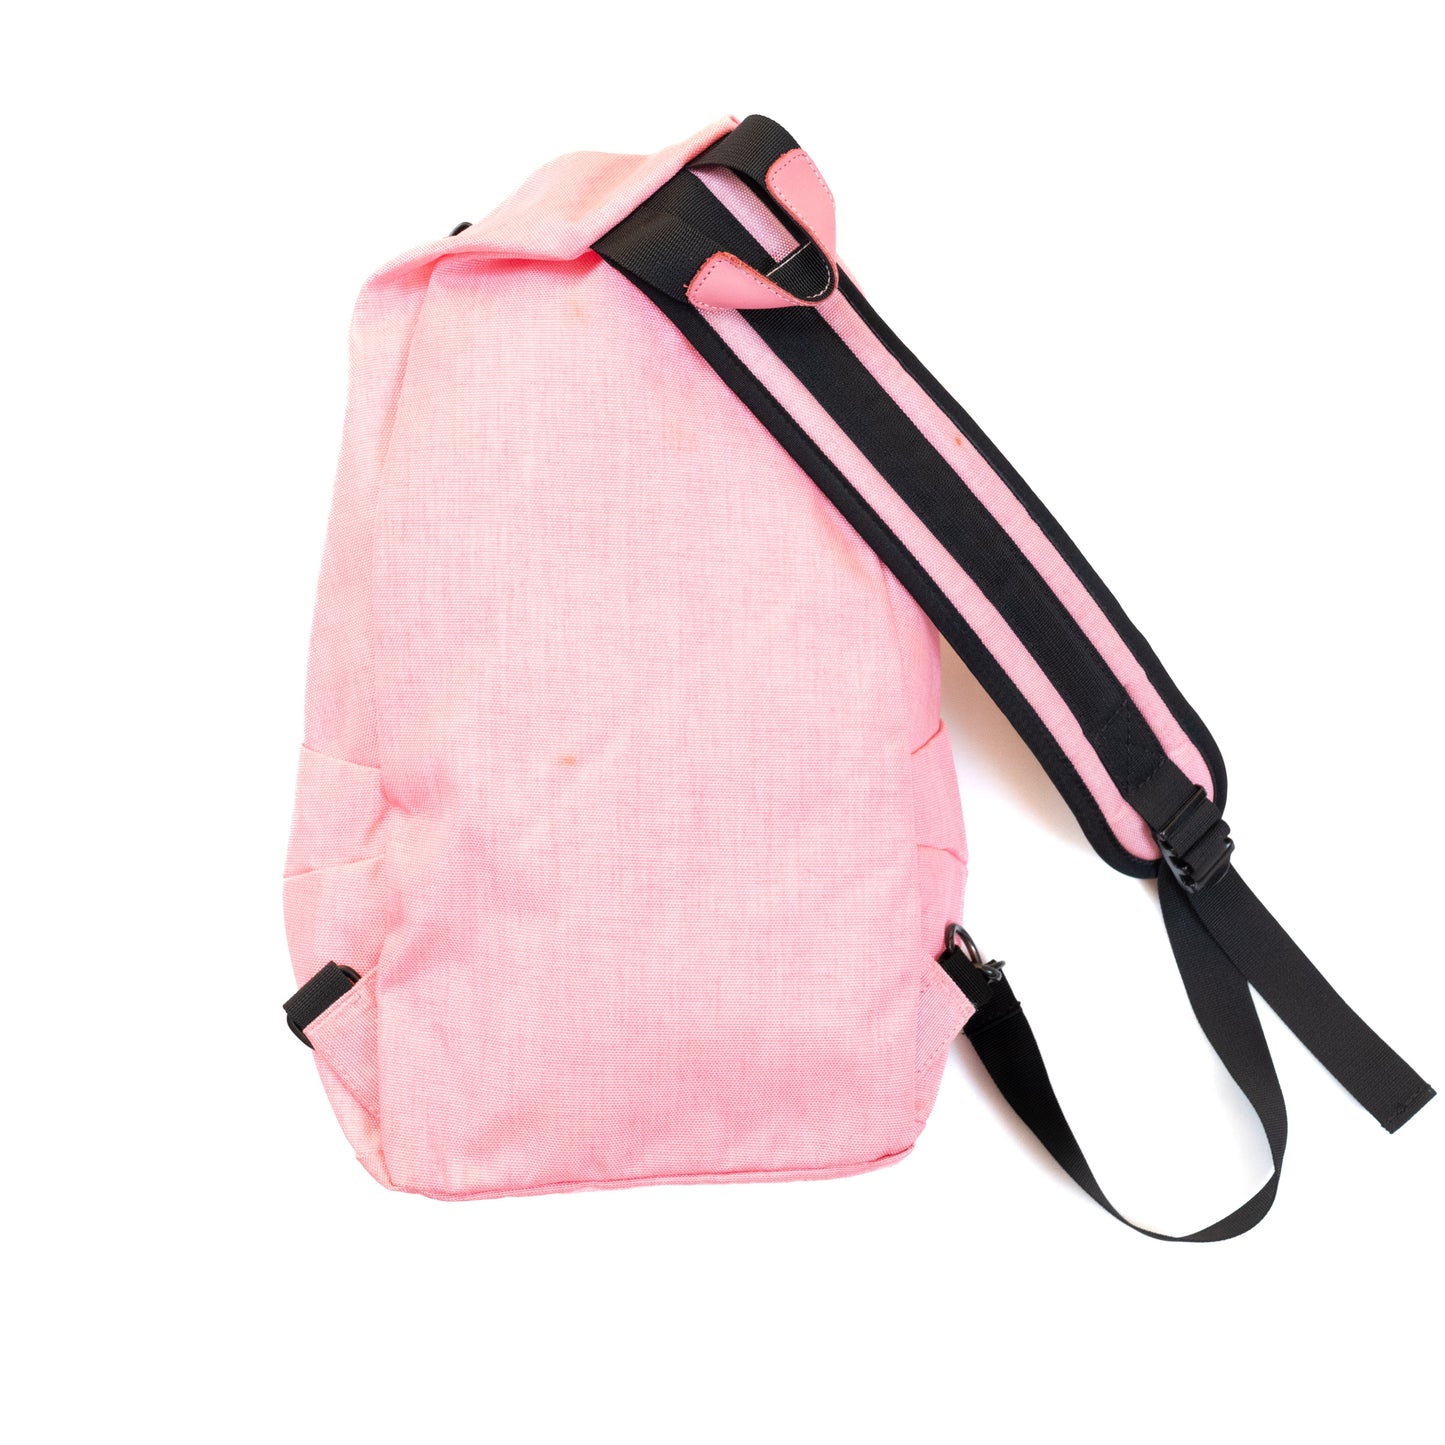 The North Face Purple Label Sling Backpack